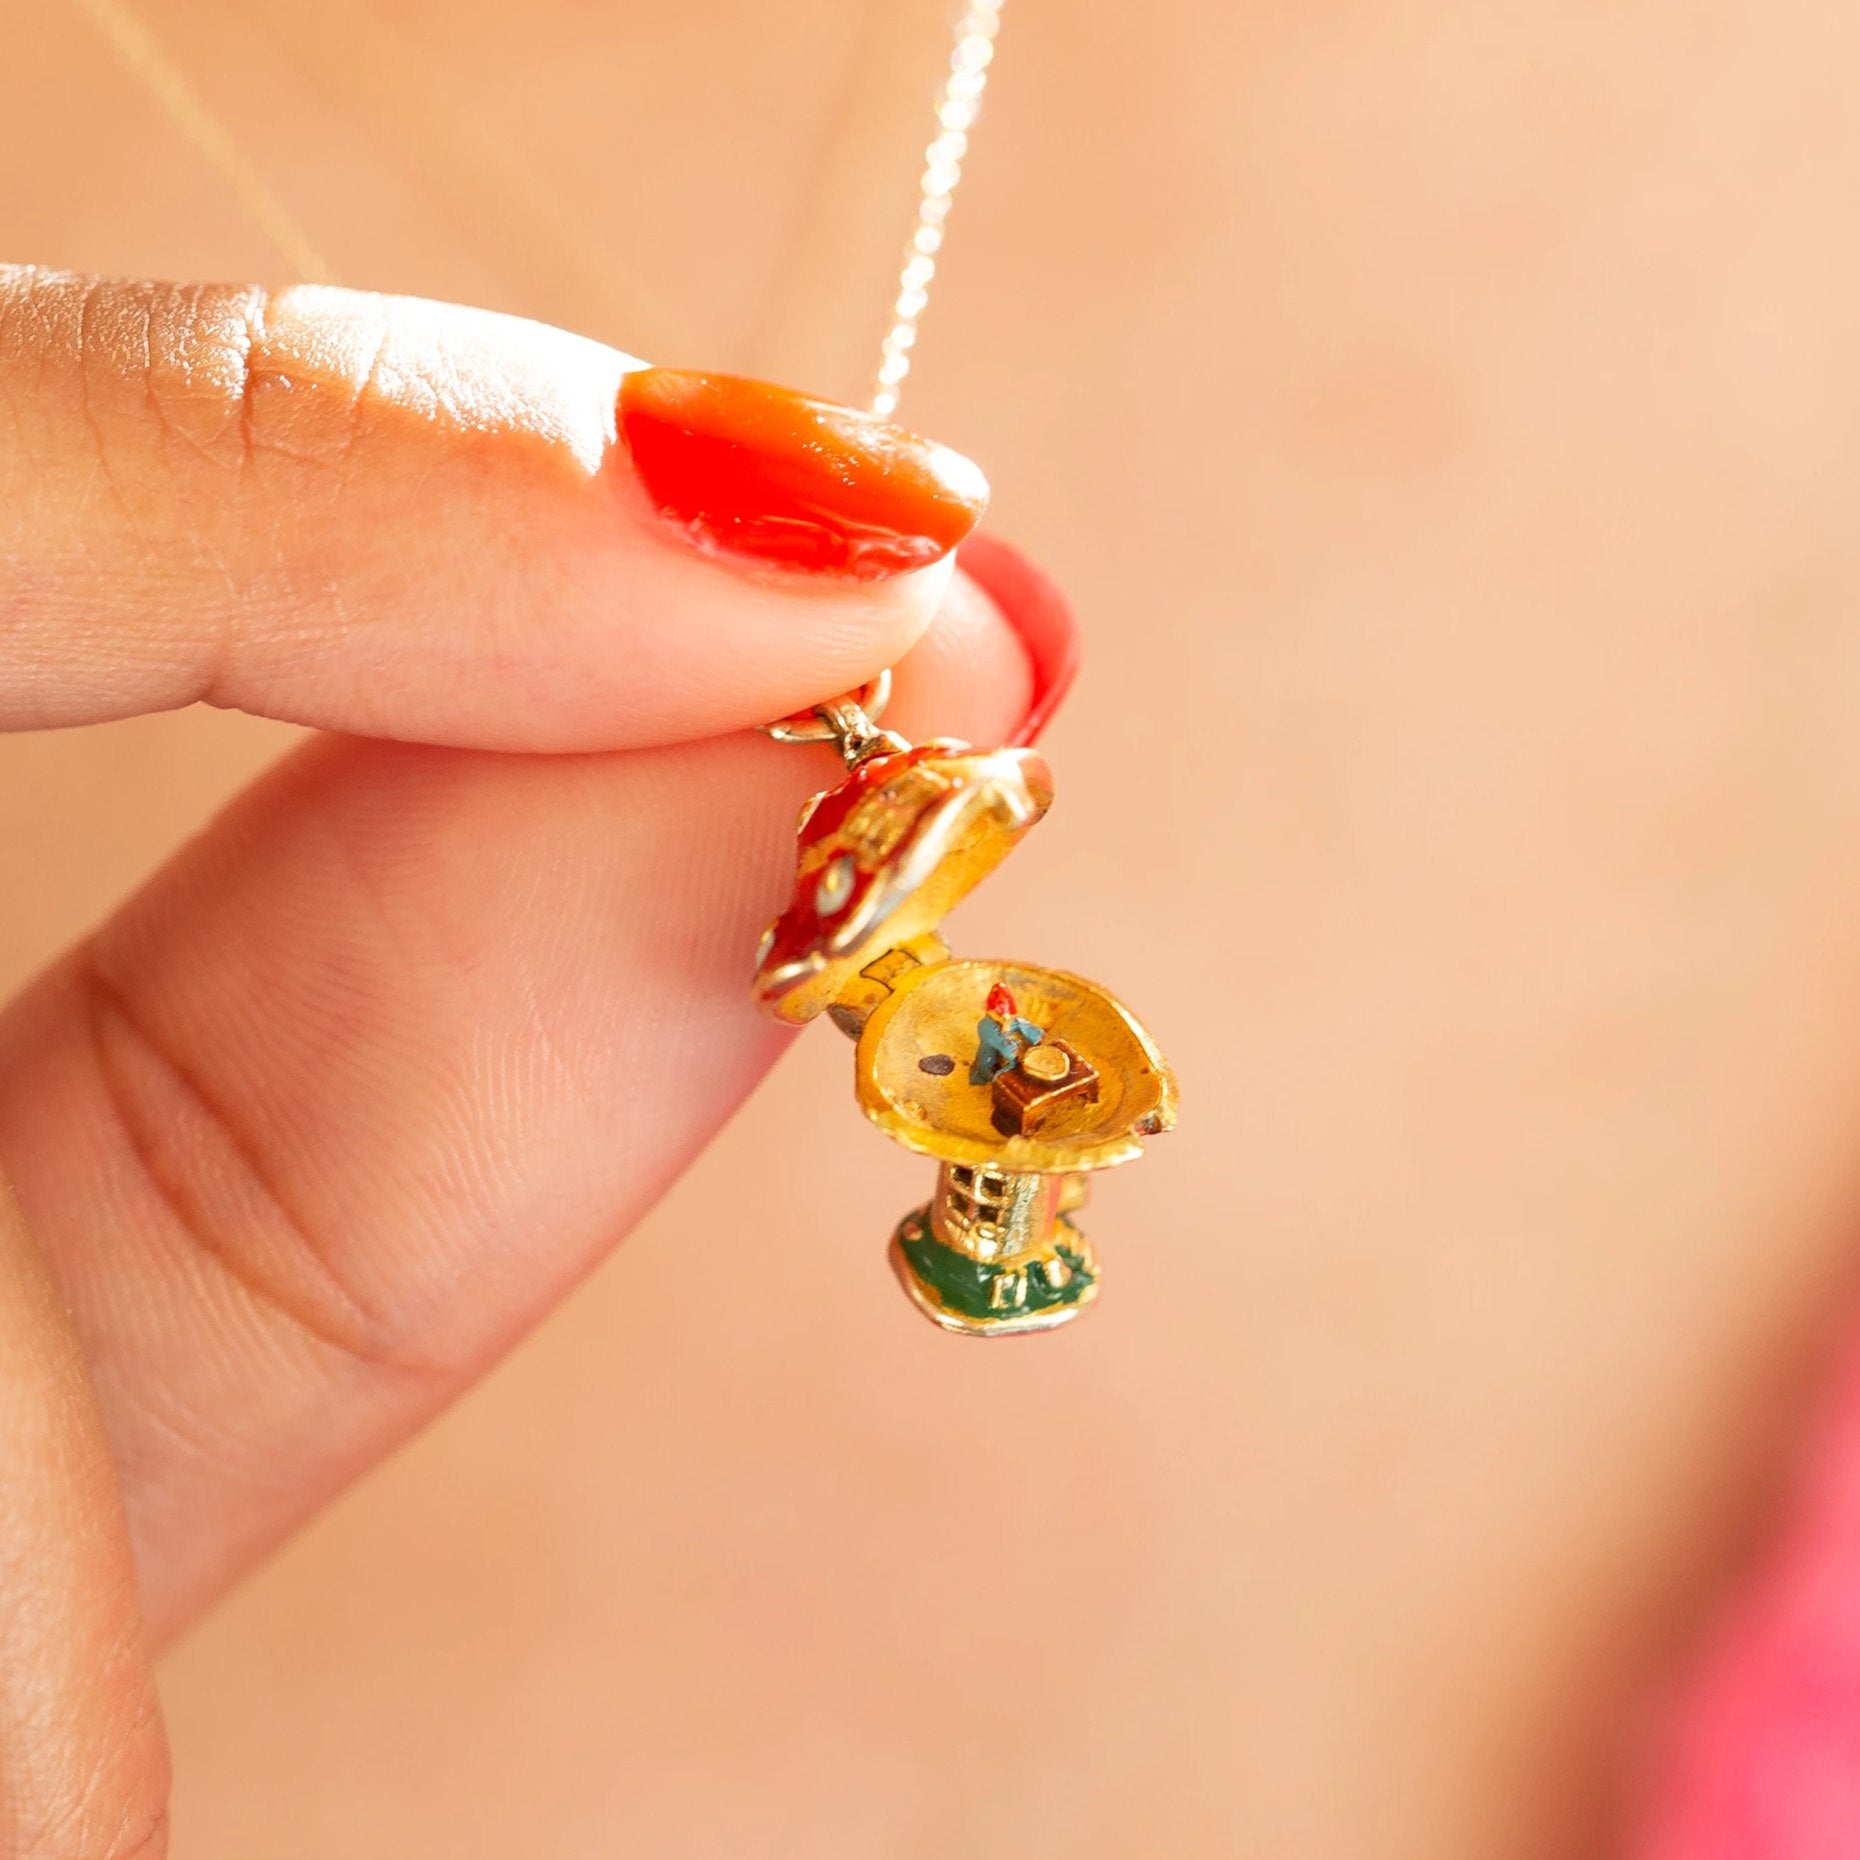 Movable Mushroom House and Gnome 14K Gold and Enamel Charm